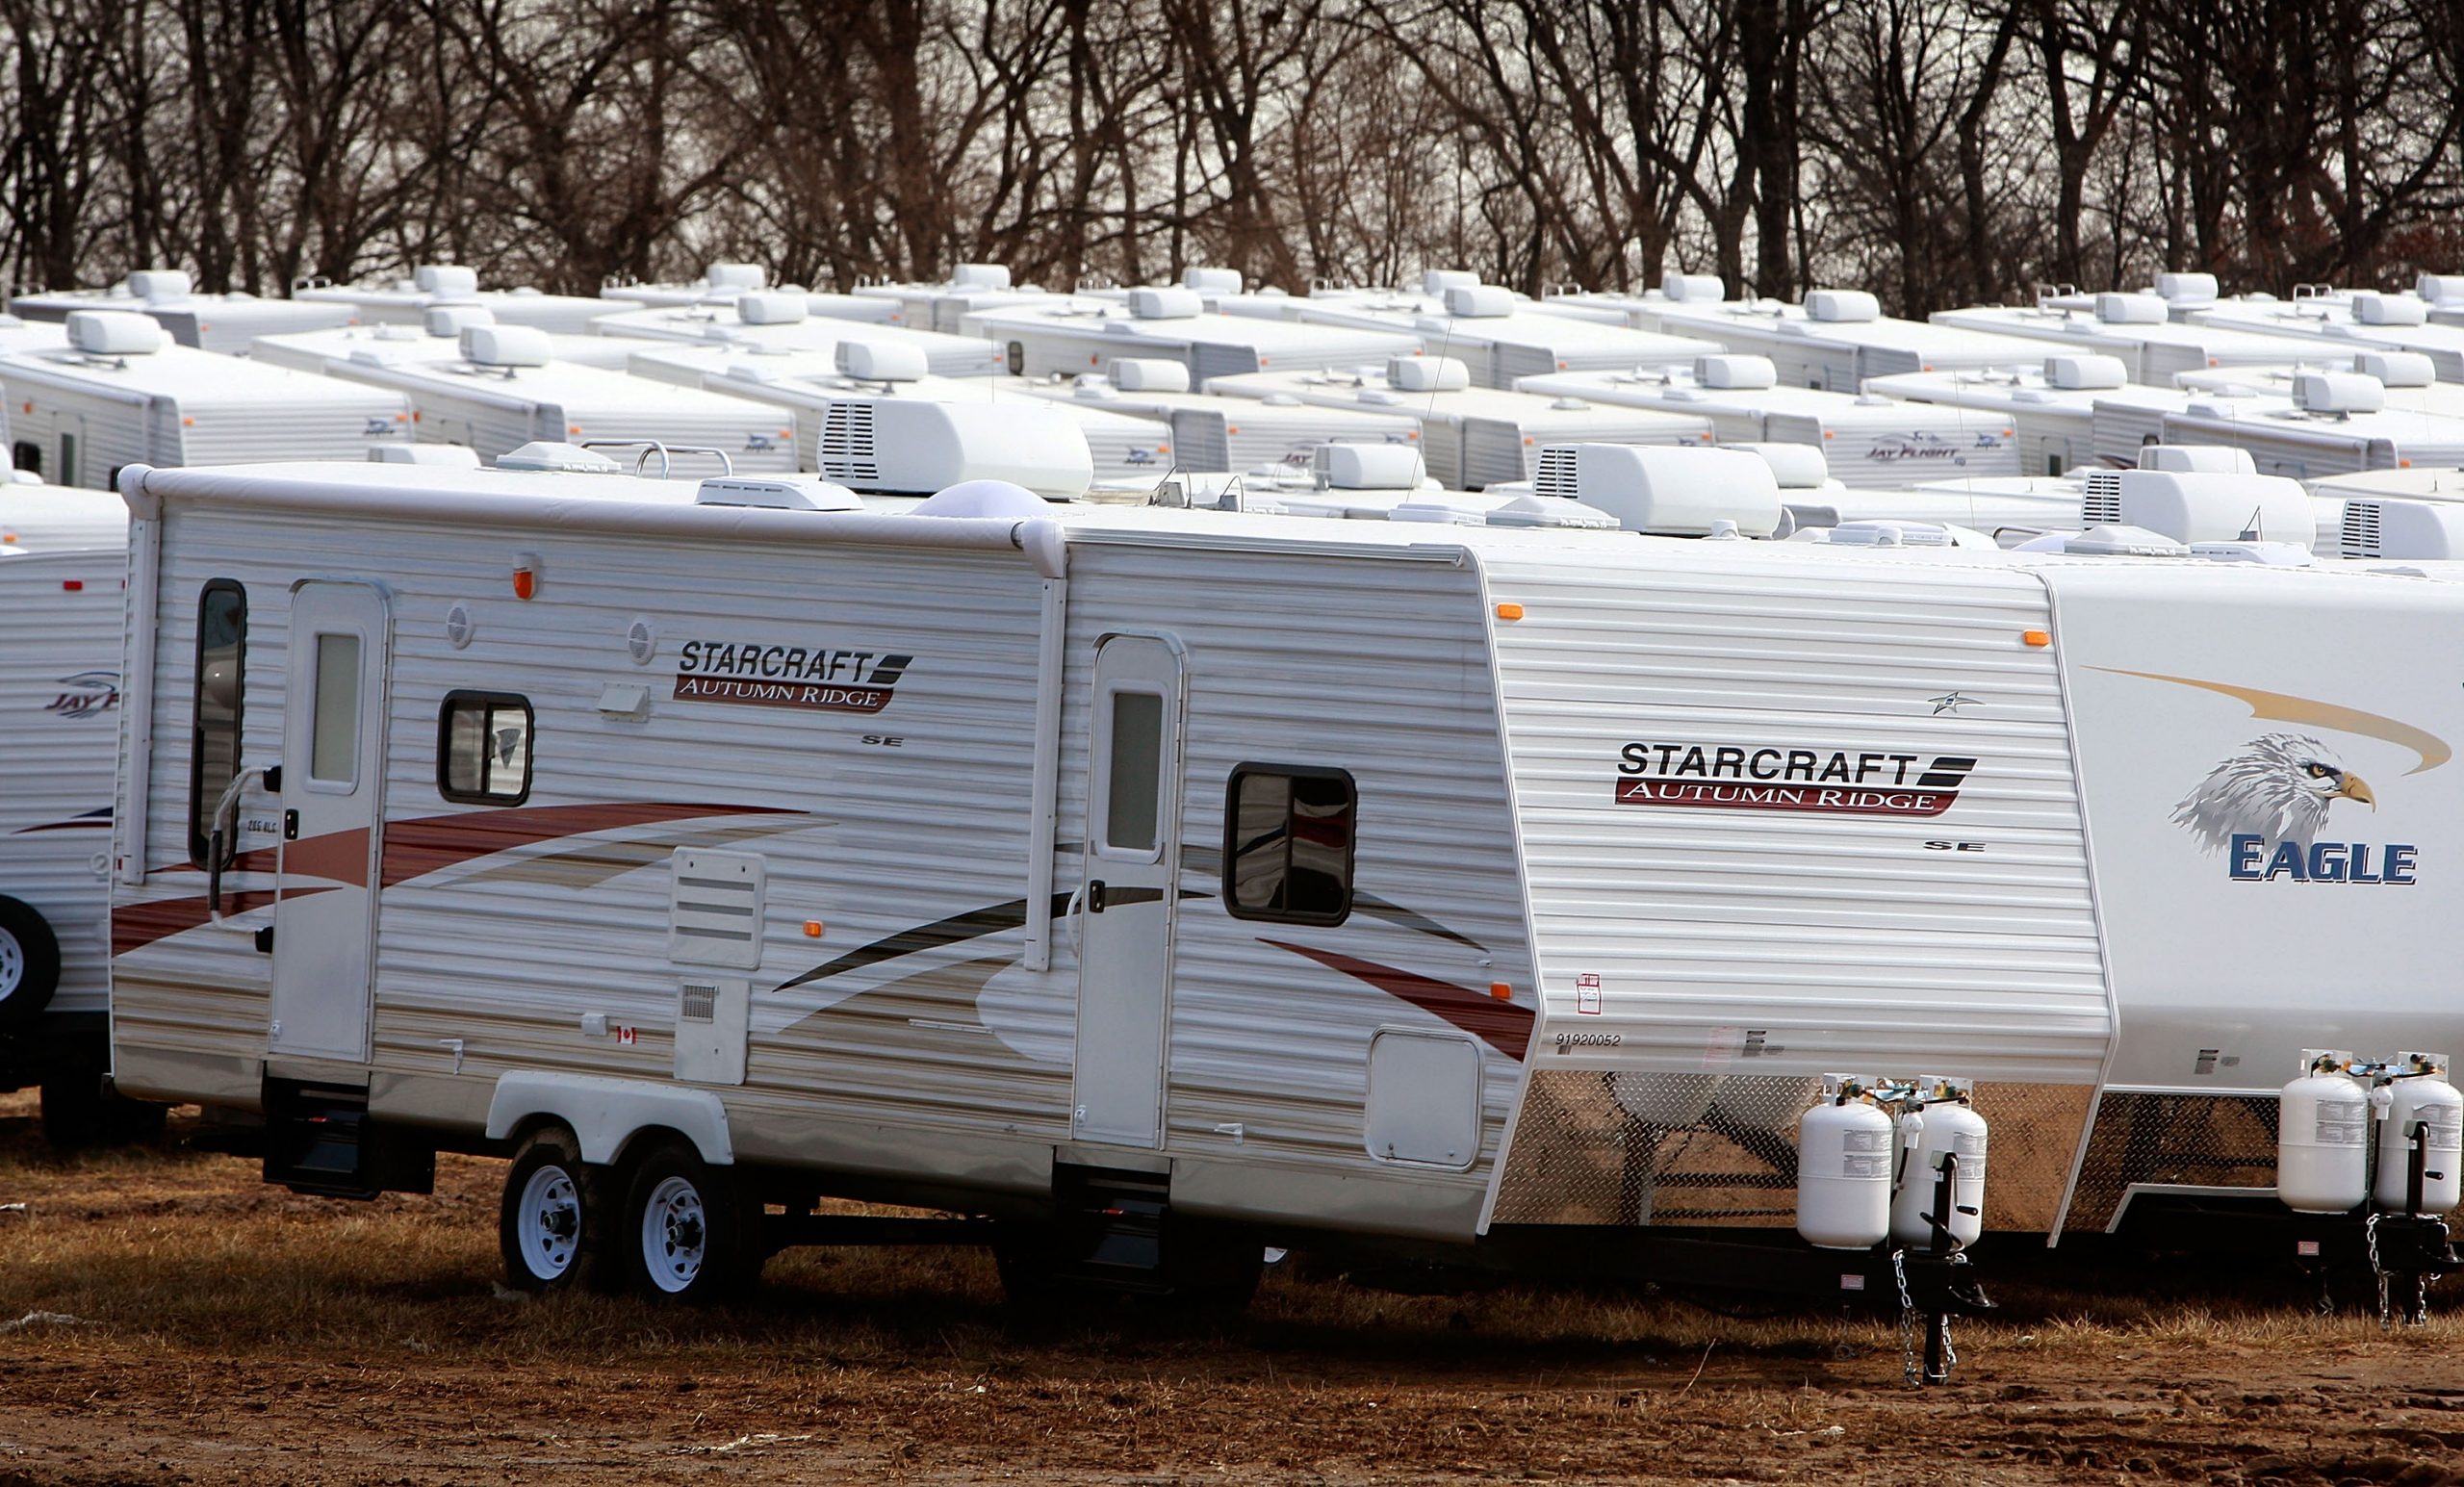 RVs sitting in the lot of a manufacturer